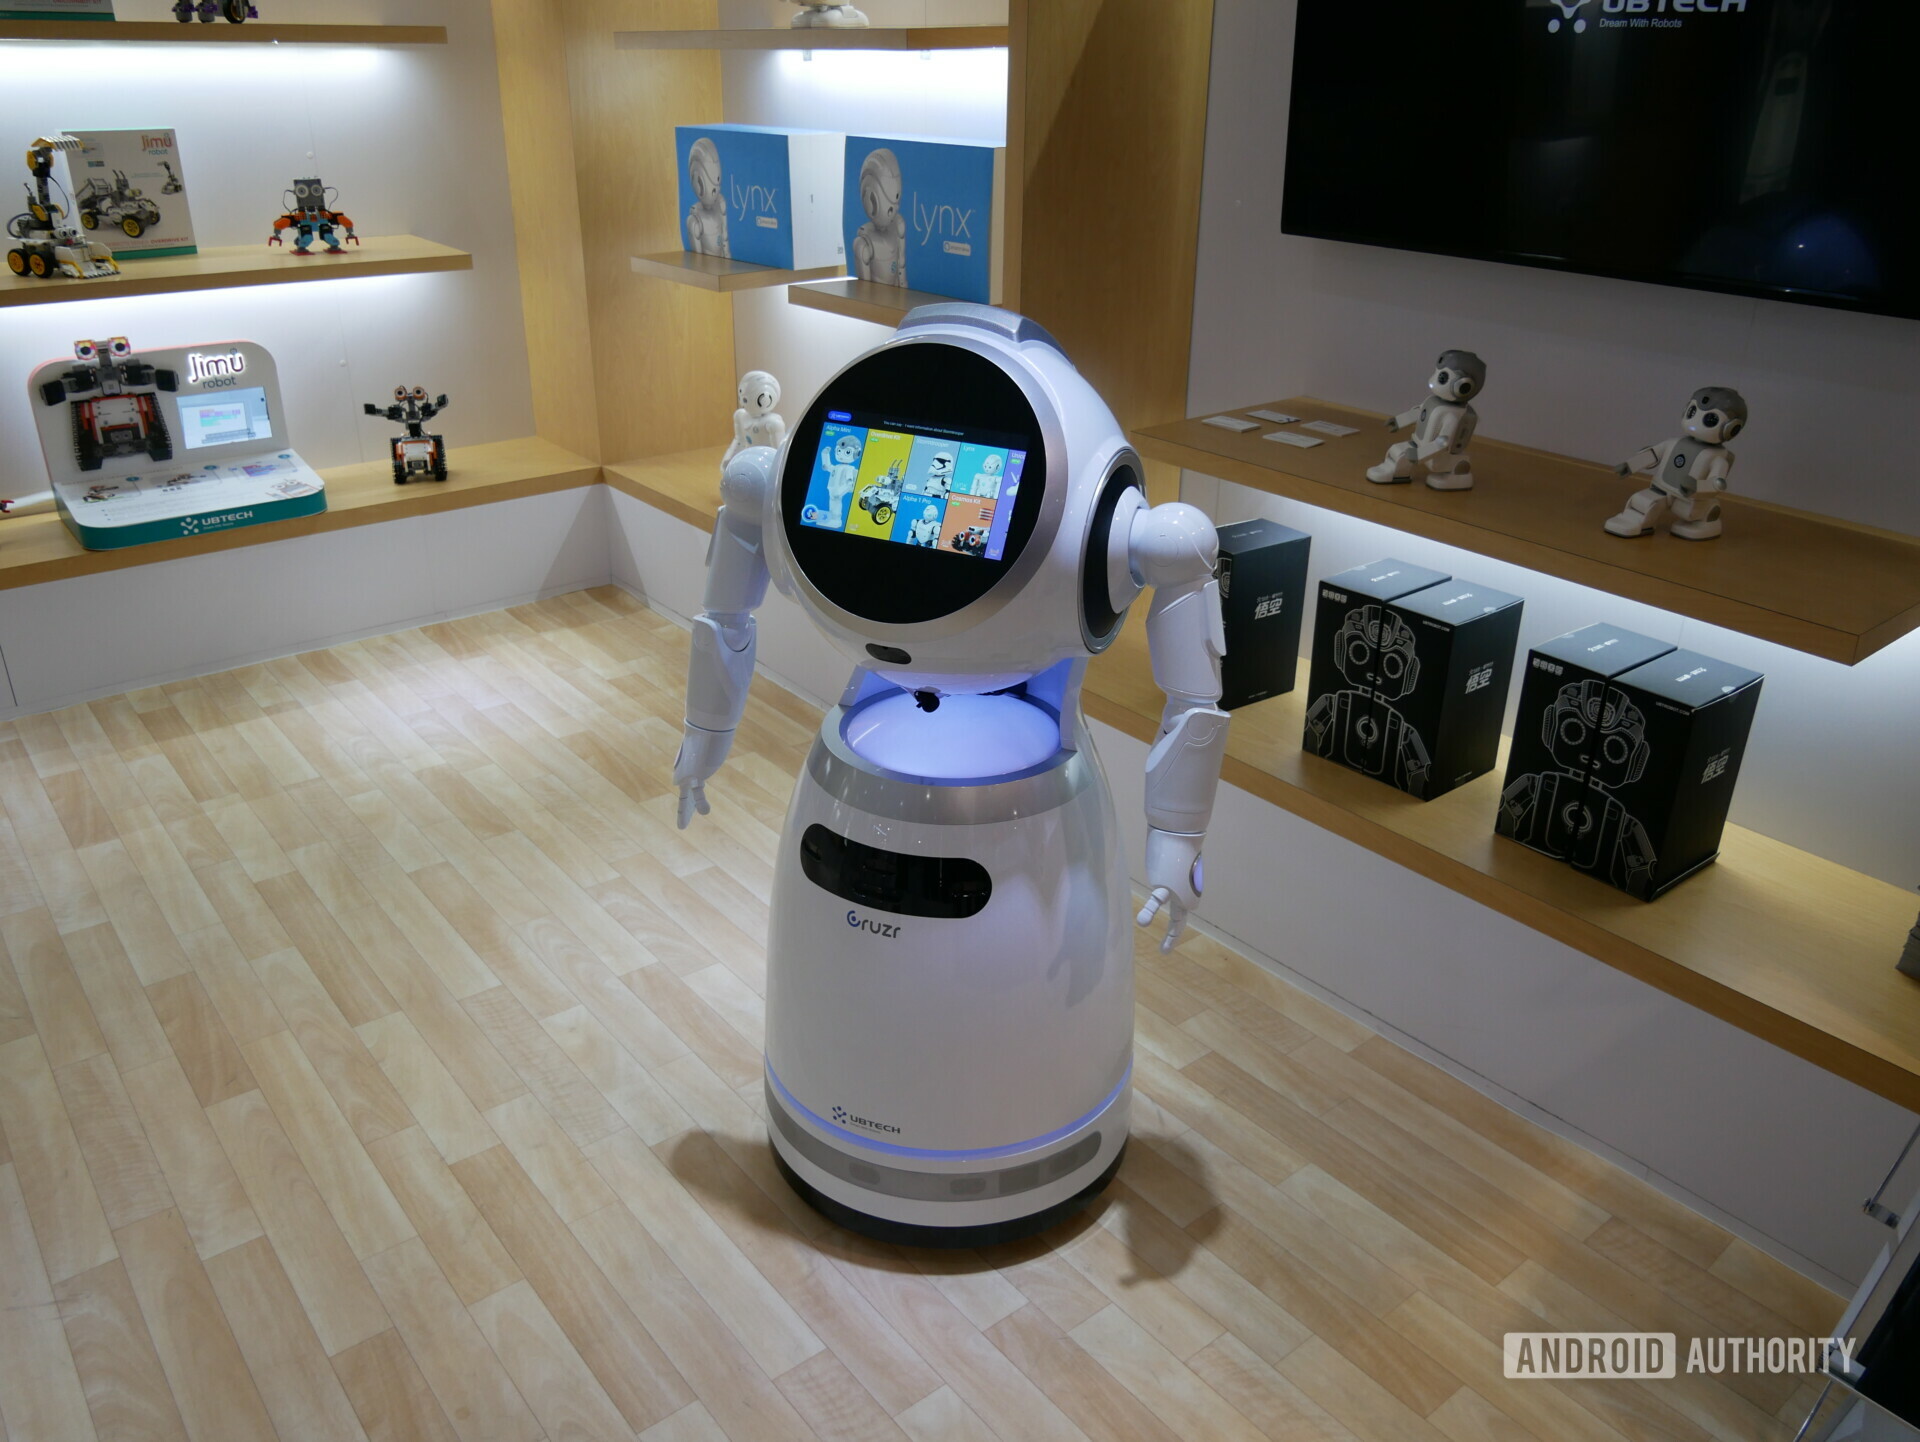 The UB Cruzr is a service bot designed for retail spaces